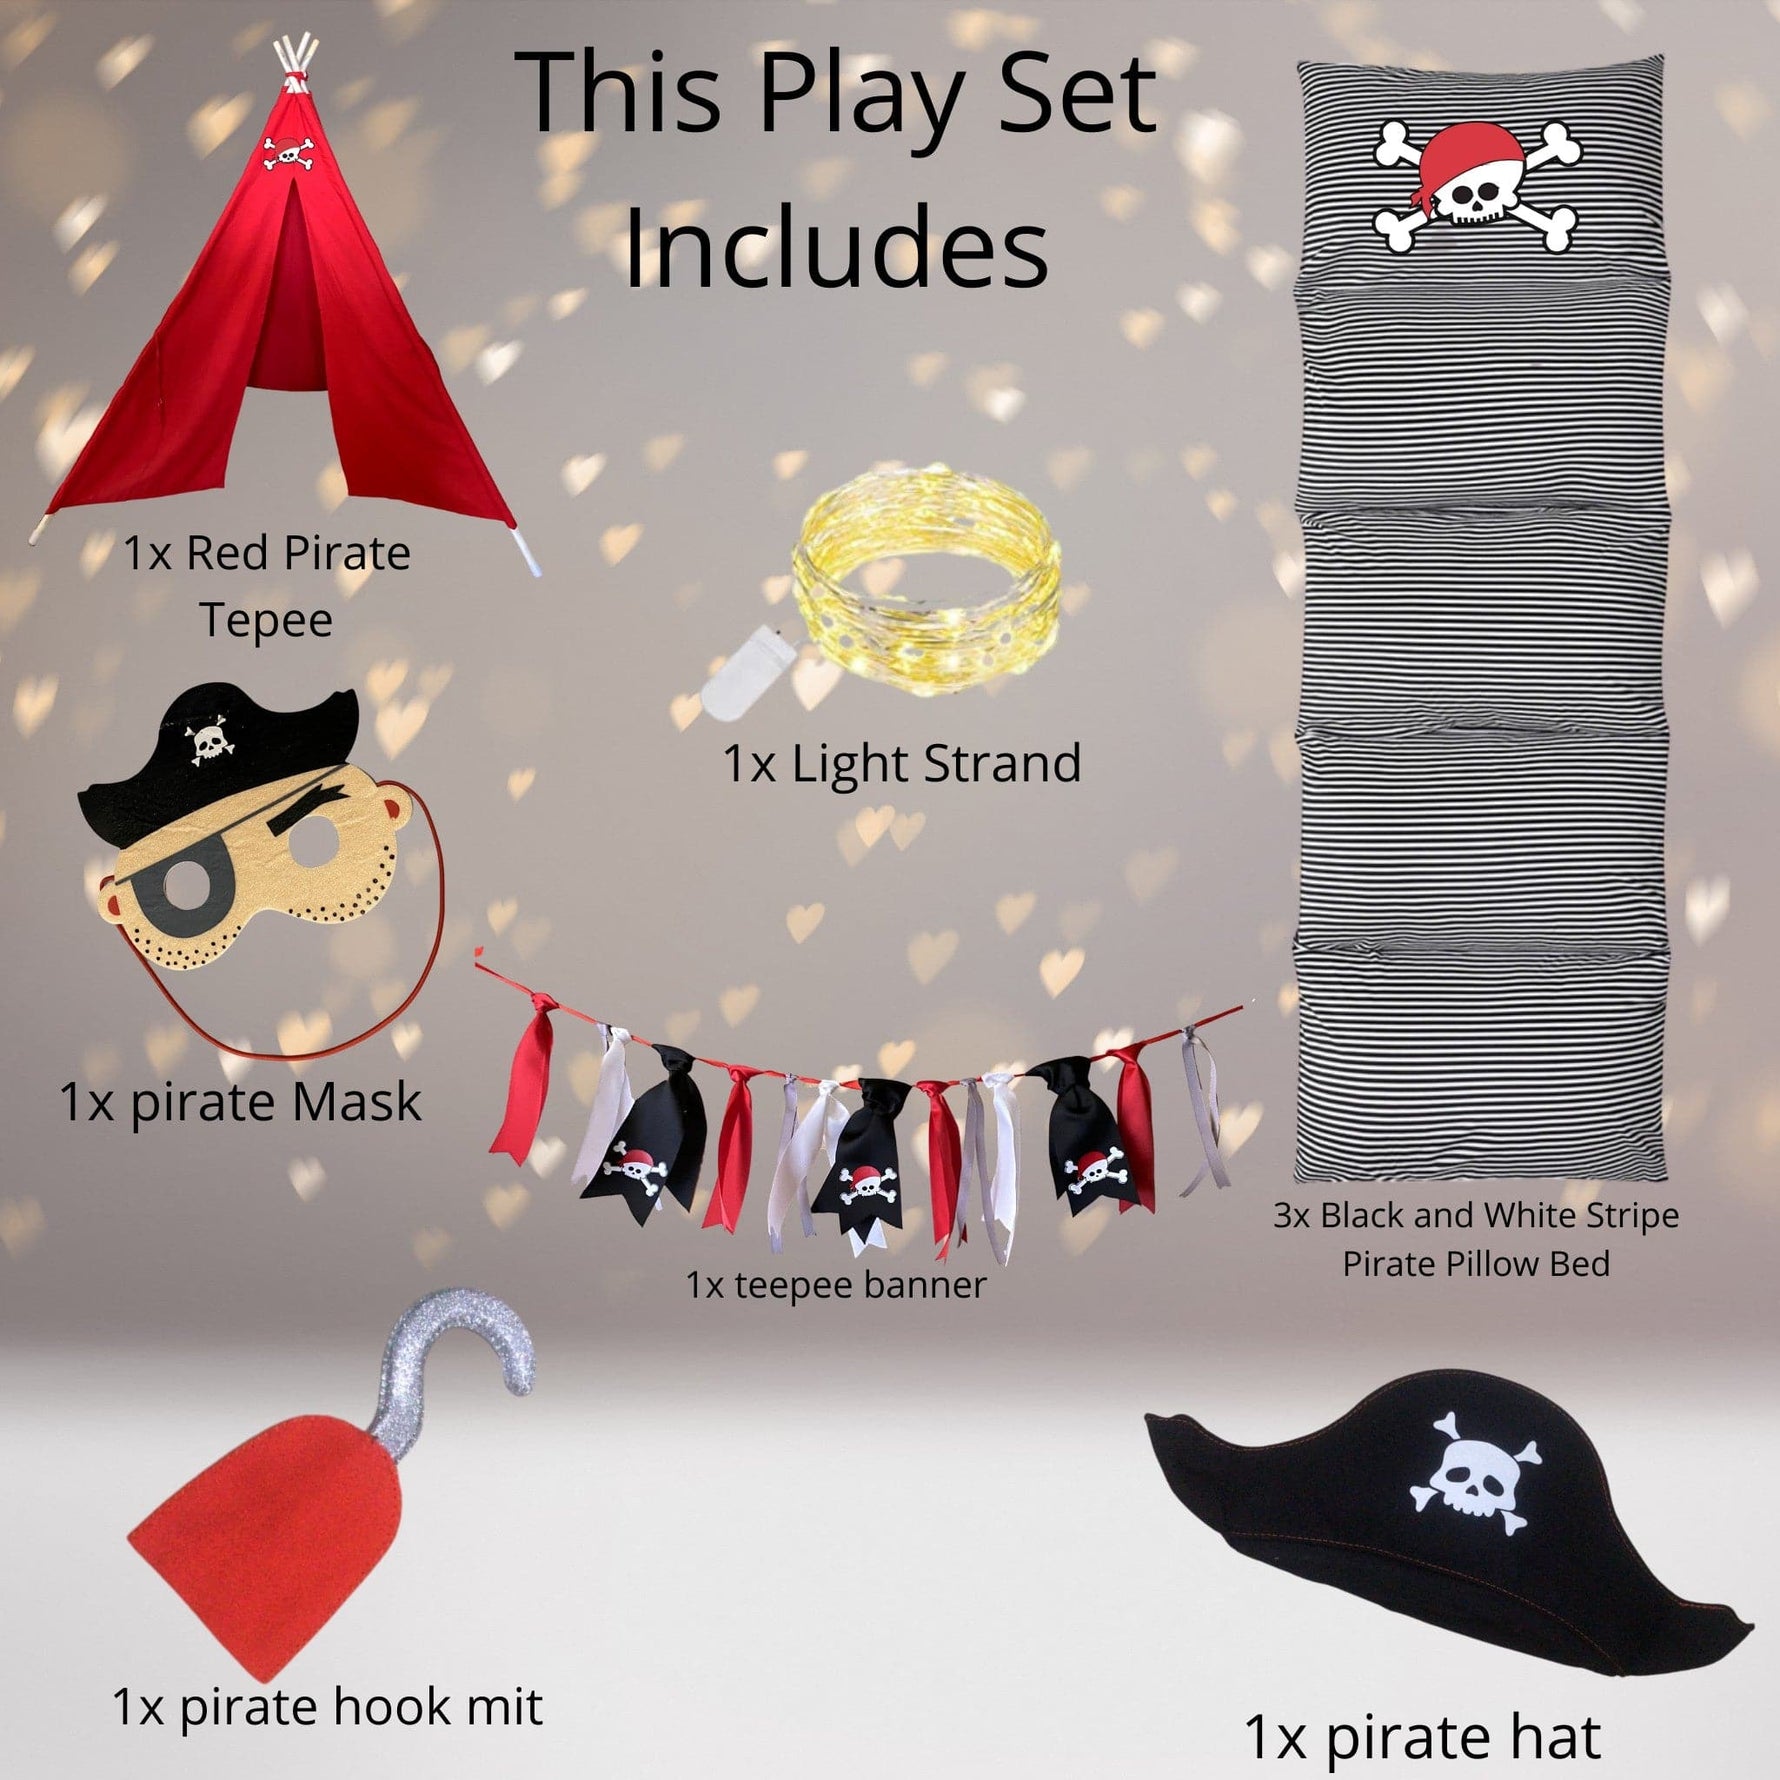 Play Set - Pirate Play Set, Pirate Party Accessories, Pirate Gift Set